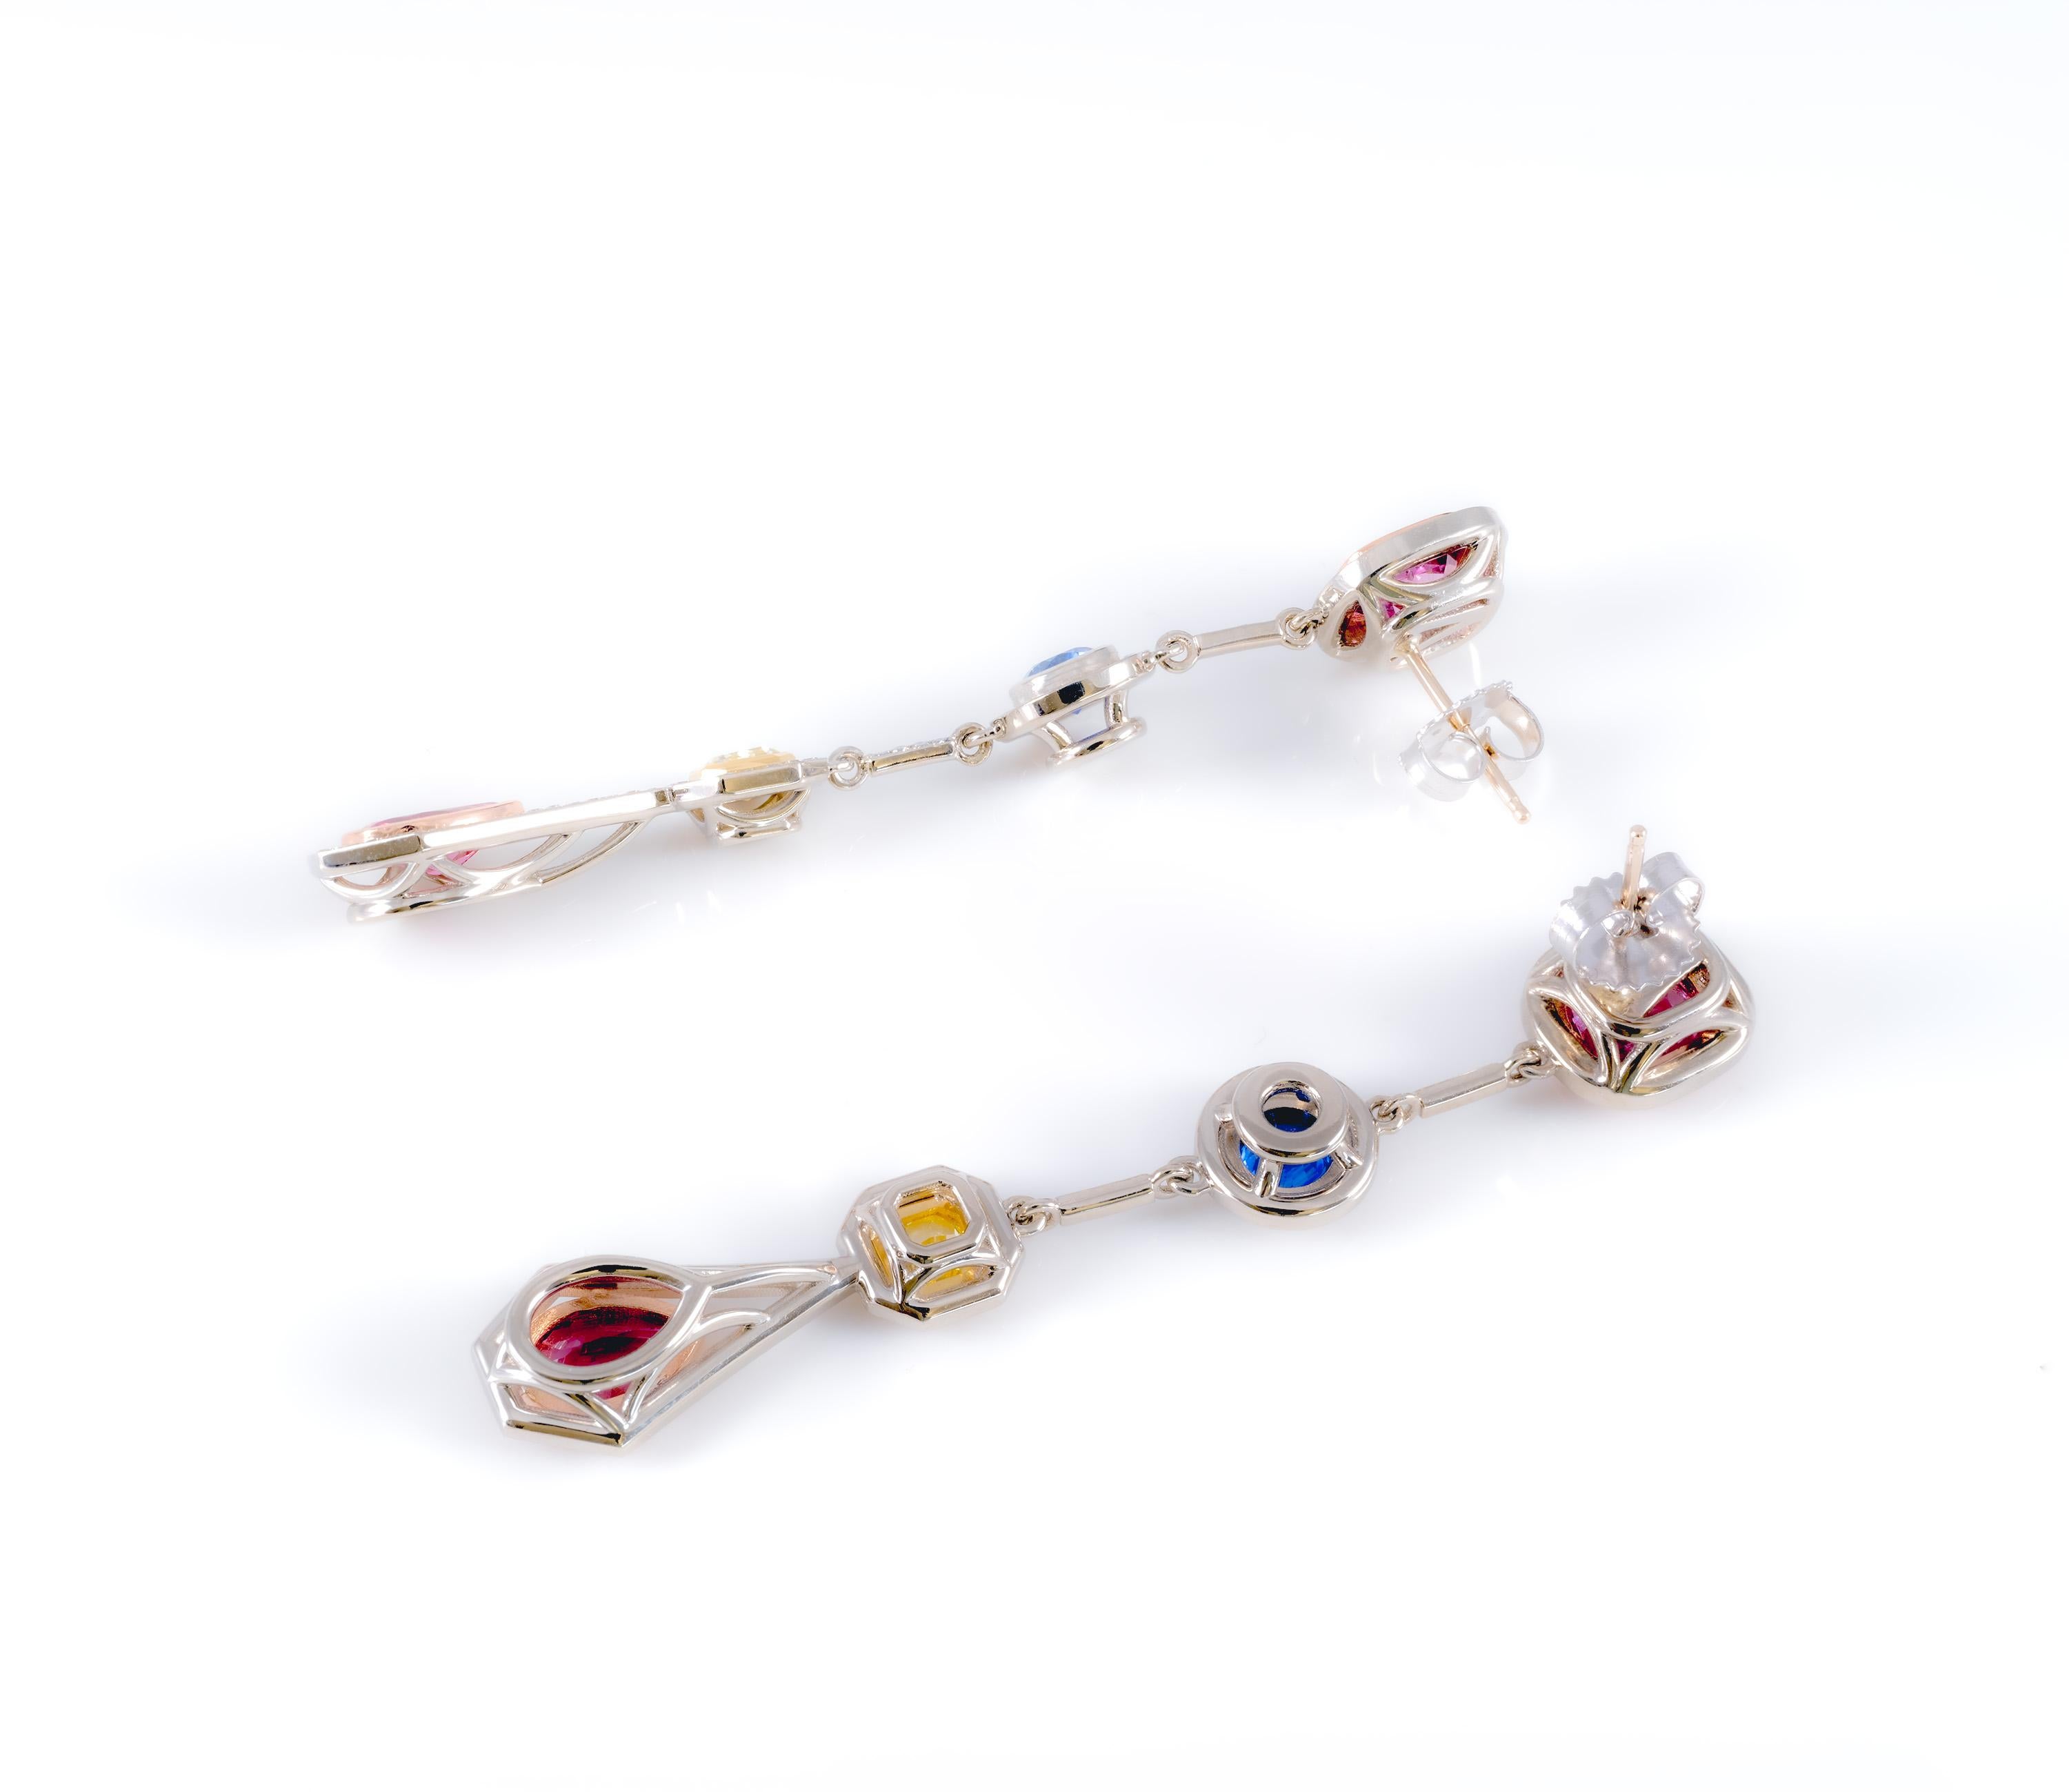 These elegant long, flowing earrings have four segments with precious stones crowning each one of them: pink spinel, blue sapphire, yellow diamond, and pink tourmaline. These cocktail earrings feature outstanding artistry and are comfortable to wear